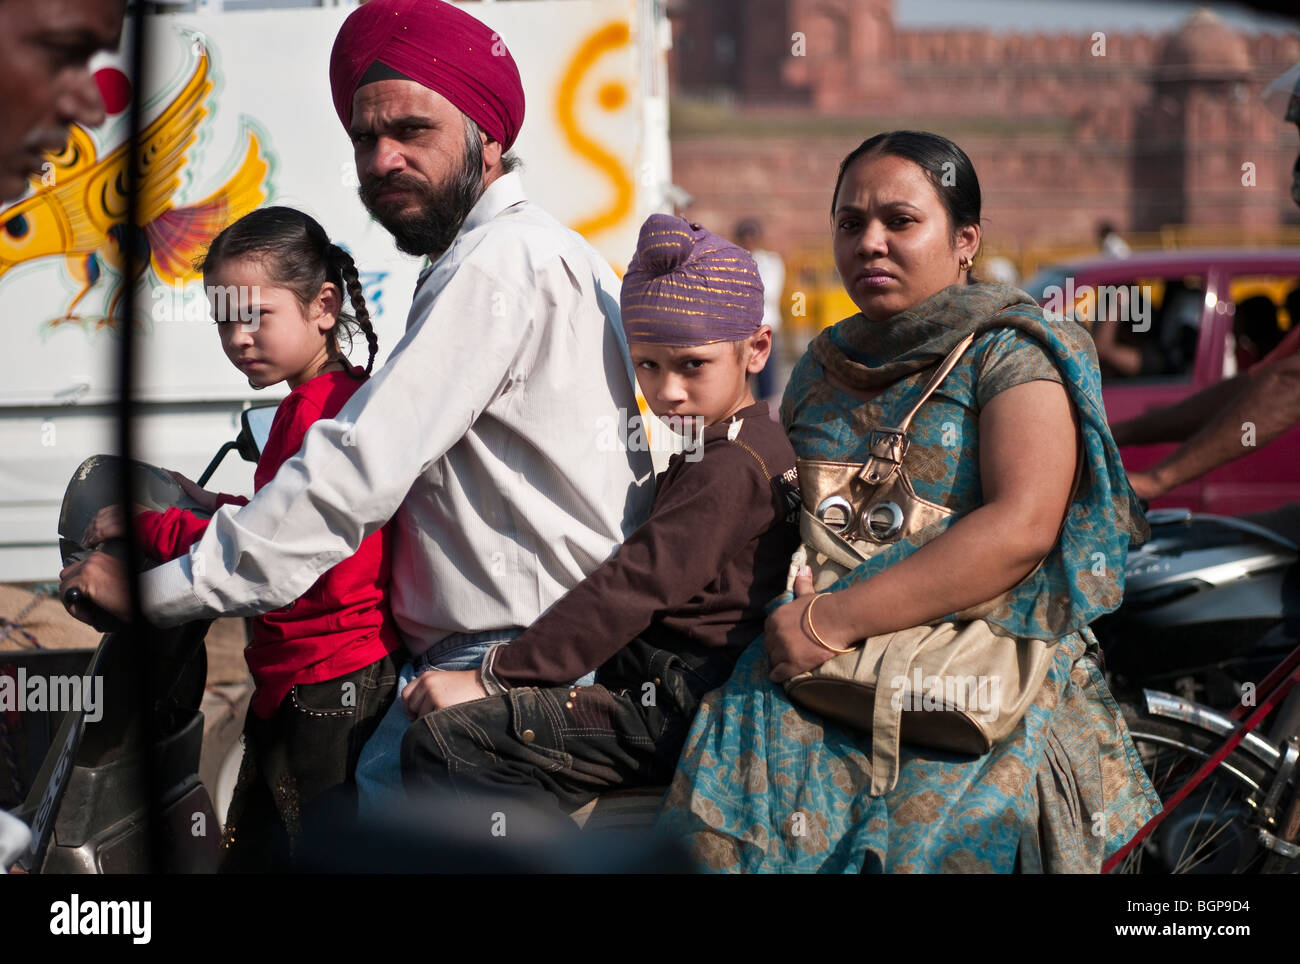 A Sikh family of four riding a scooter, downtown Delhi, India Stock Photo